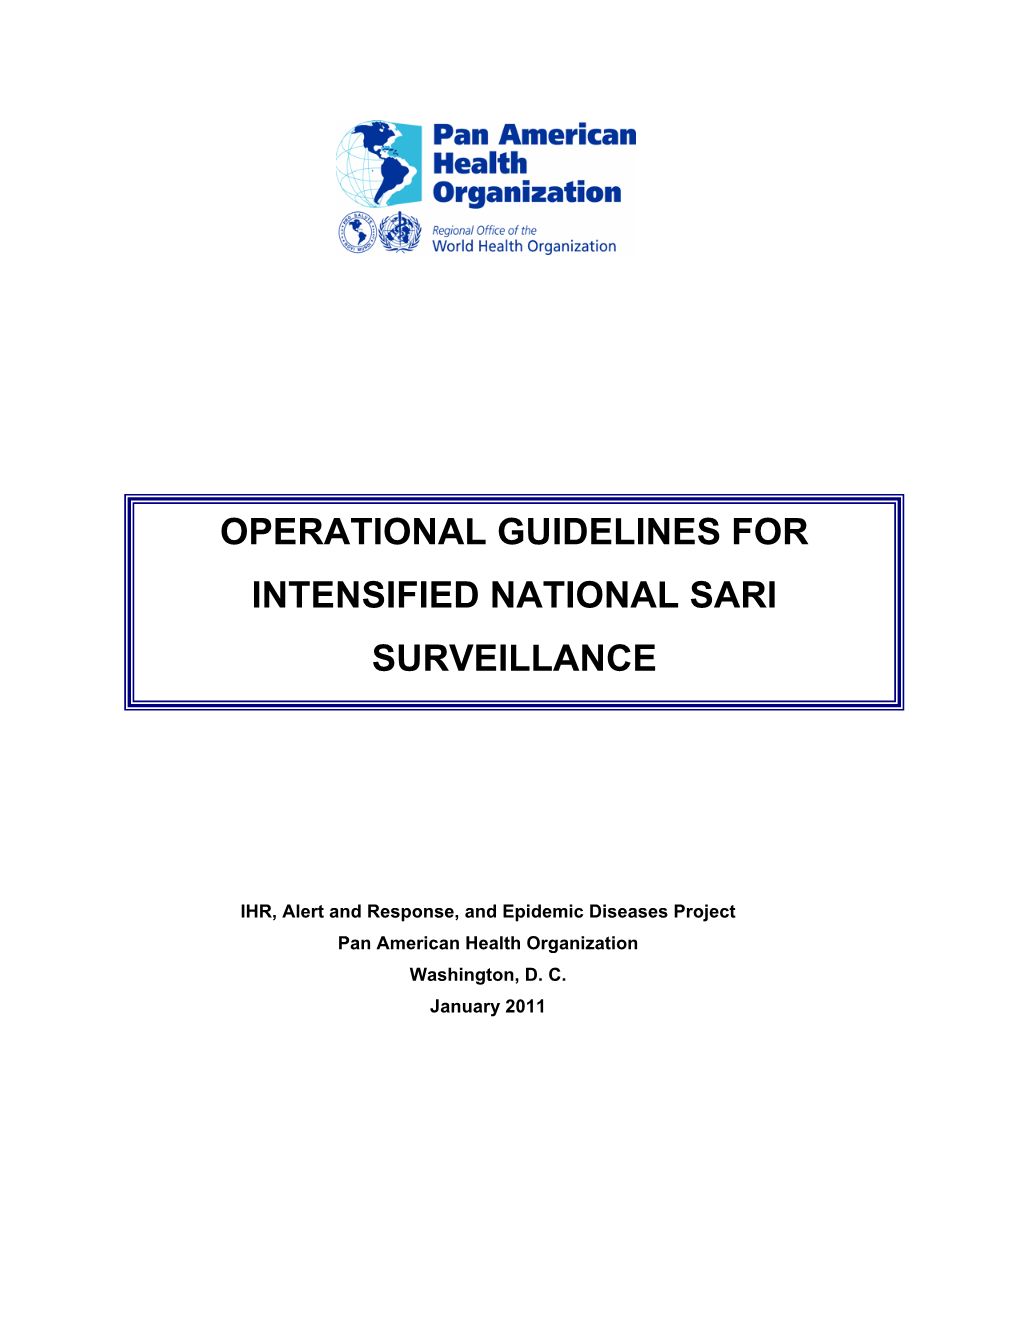 Operational Guidelines for Intensified National Sari Surveillance